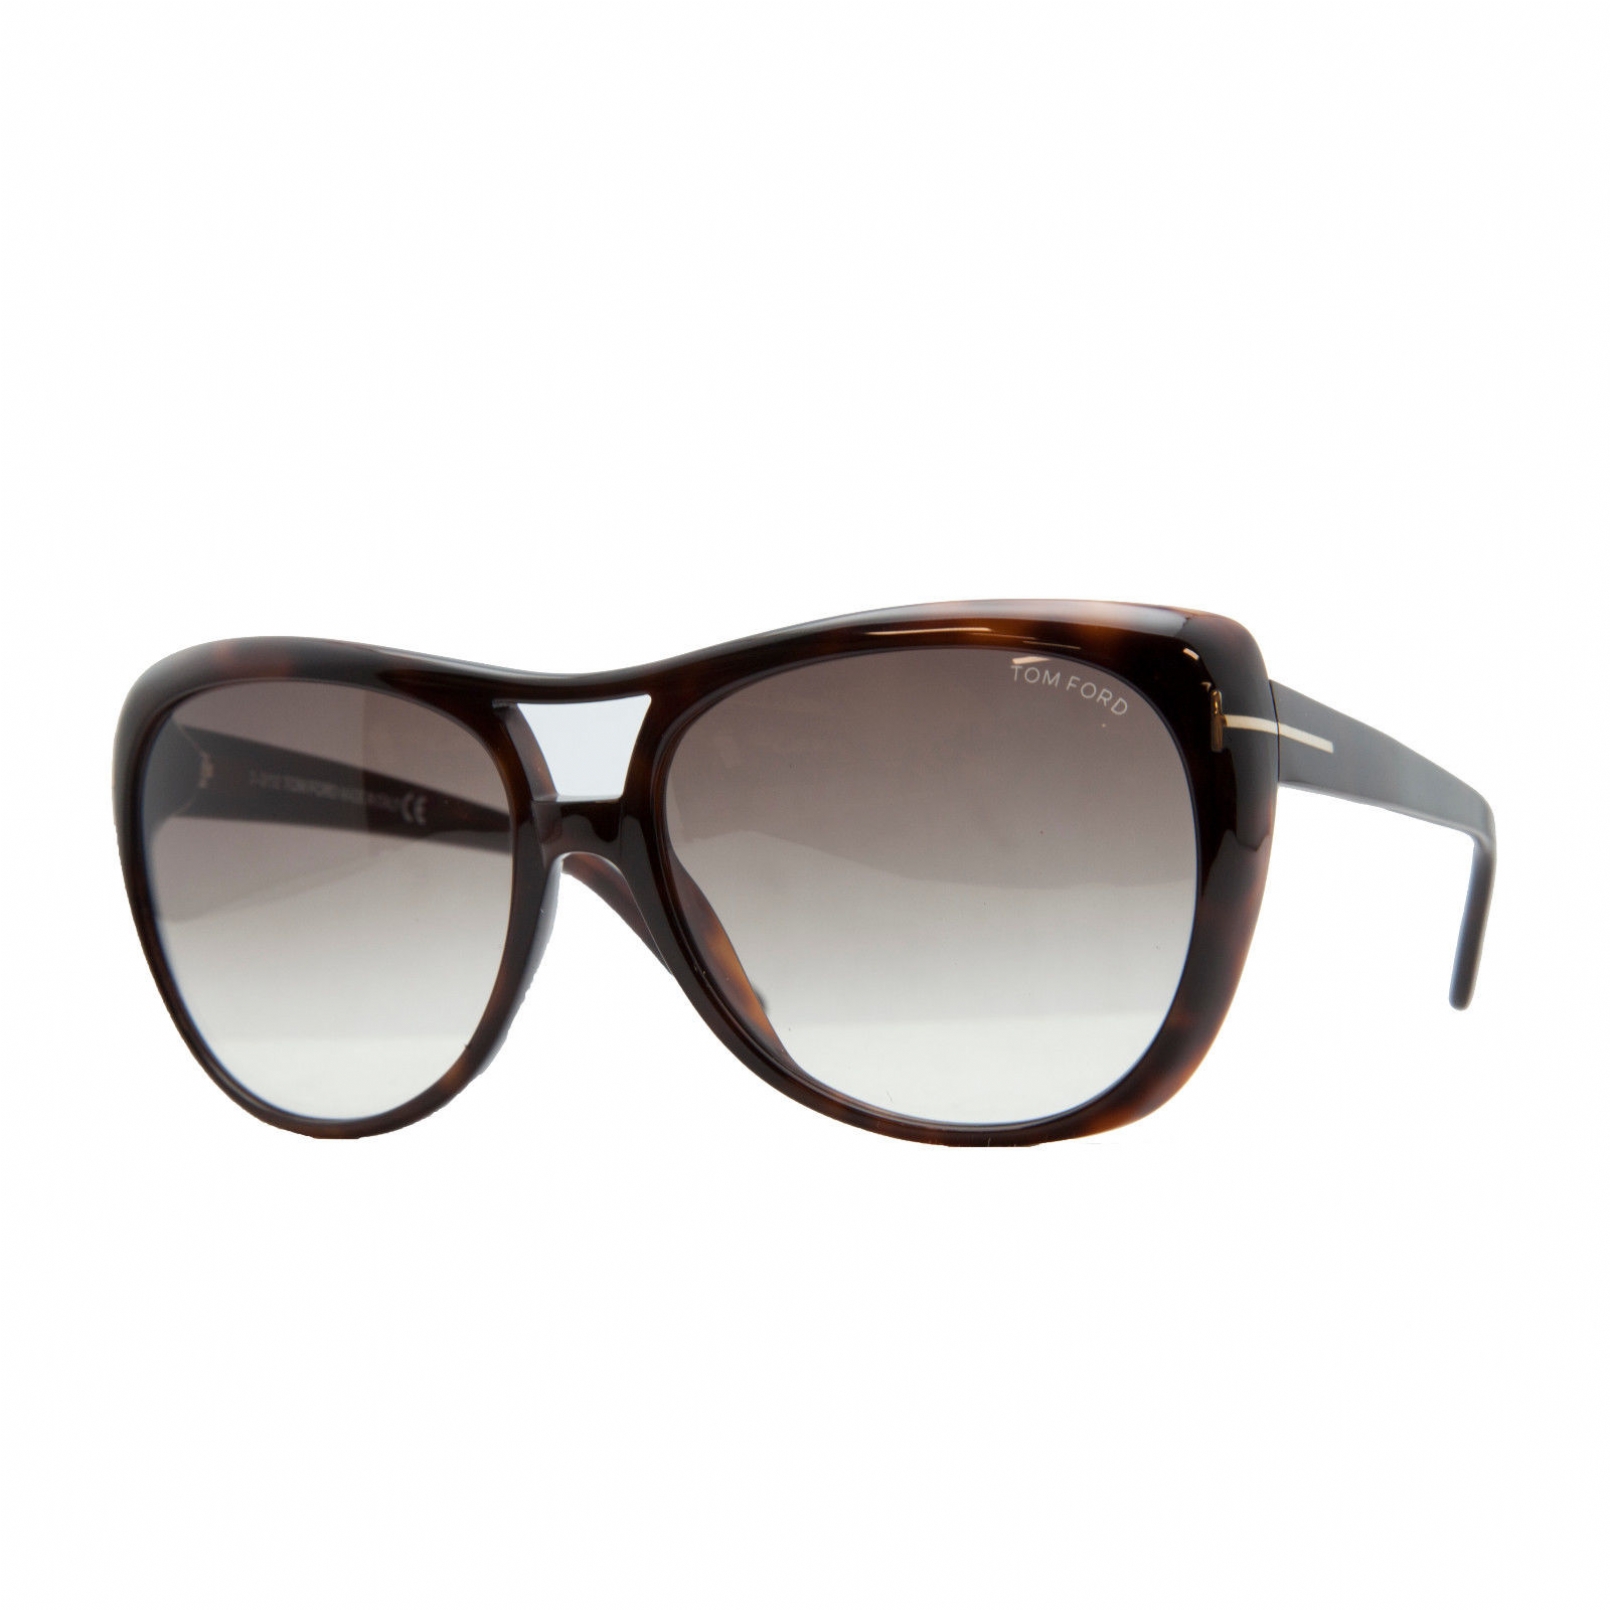 TOM FORD CLAUDETTE TF294 52F